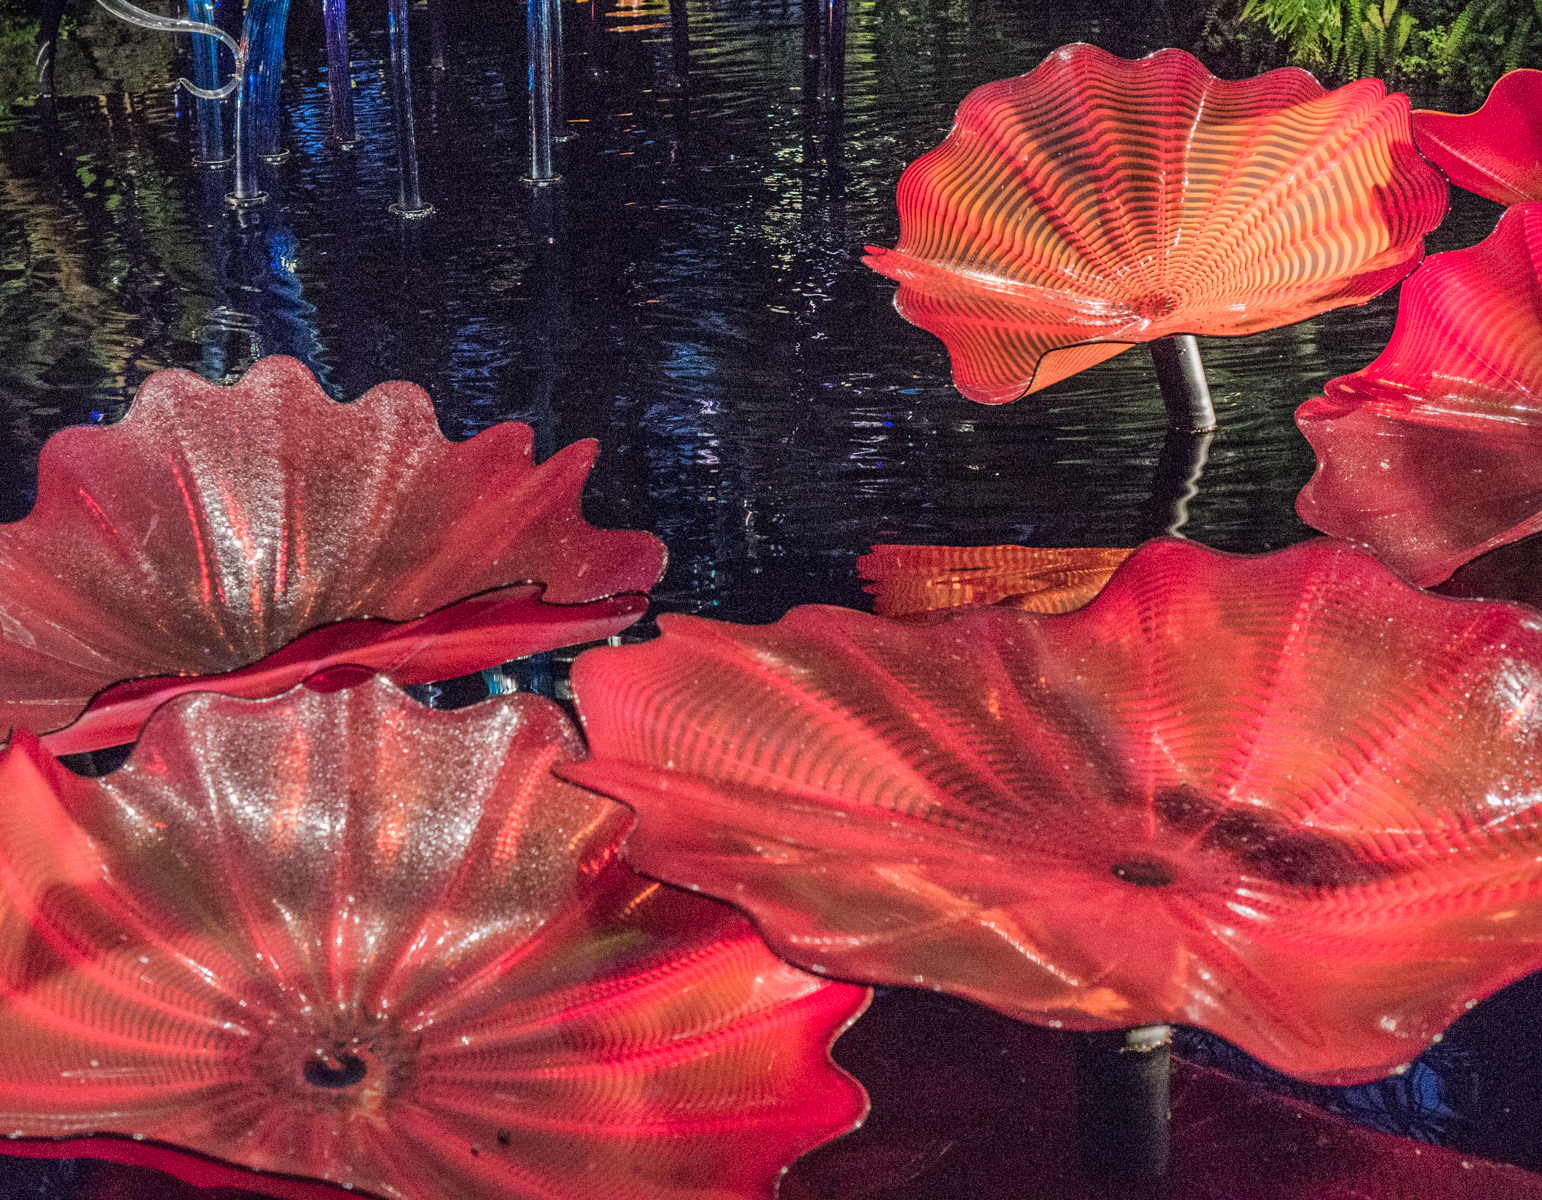 Dale Chihuly glass sculpture PERSIAN POND AND FIORI (closeup) at the New York Botanical Garden (2017) | Photo by Mike Hudak.